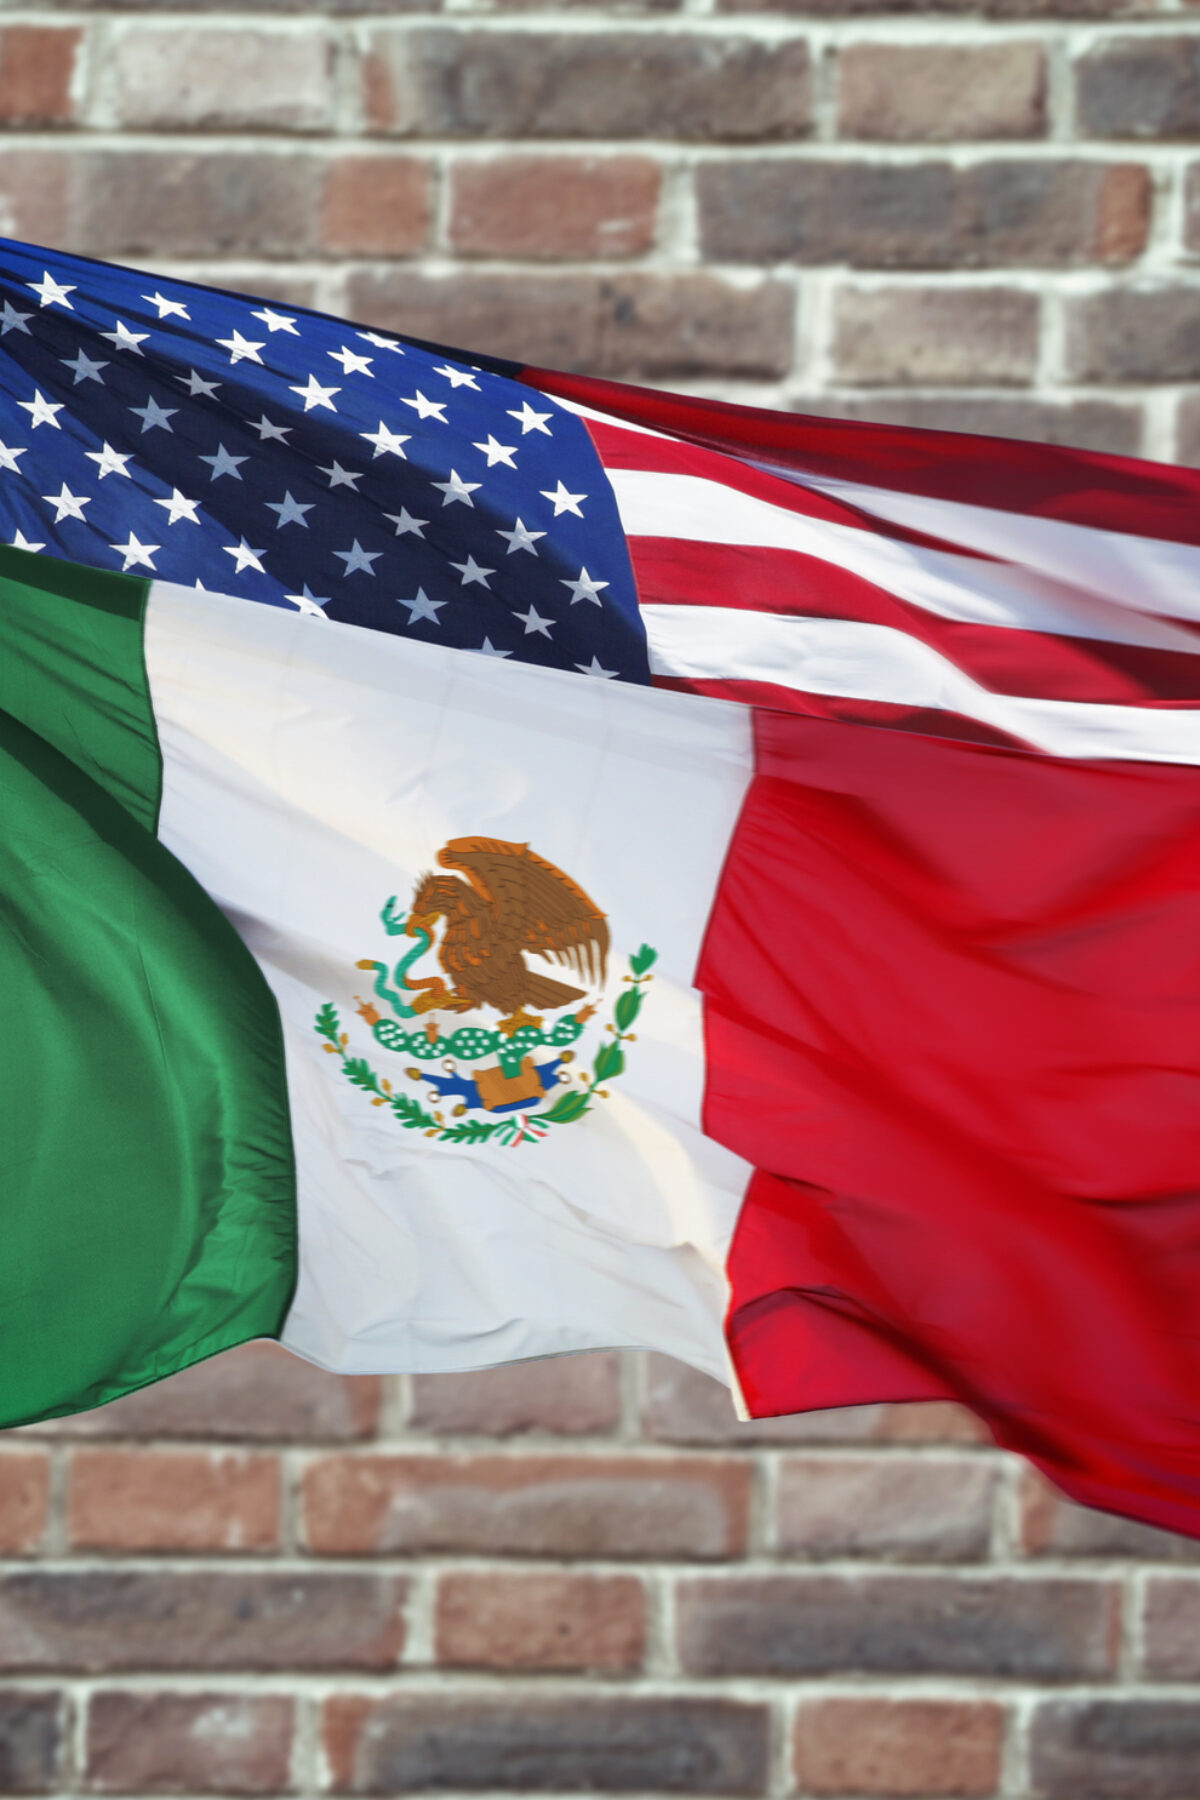 Mexican and American flag with wall behind